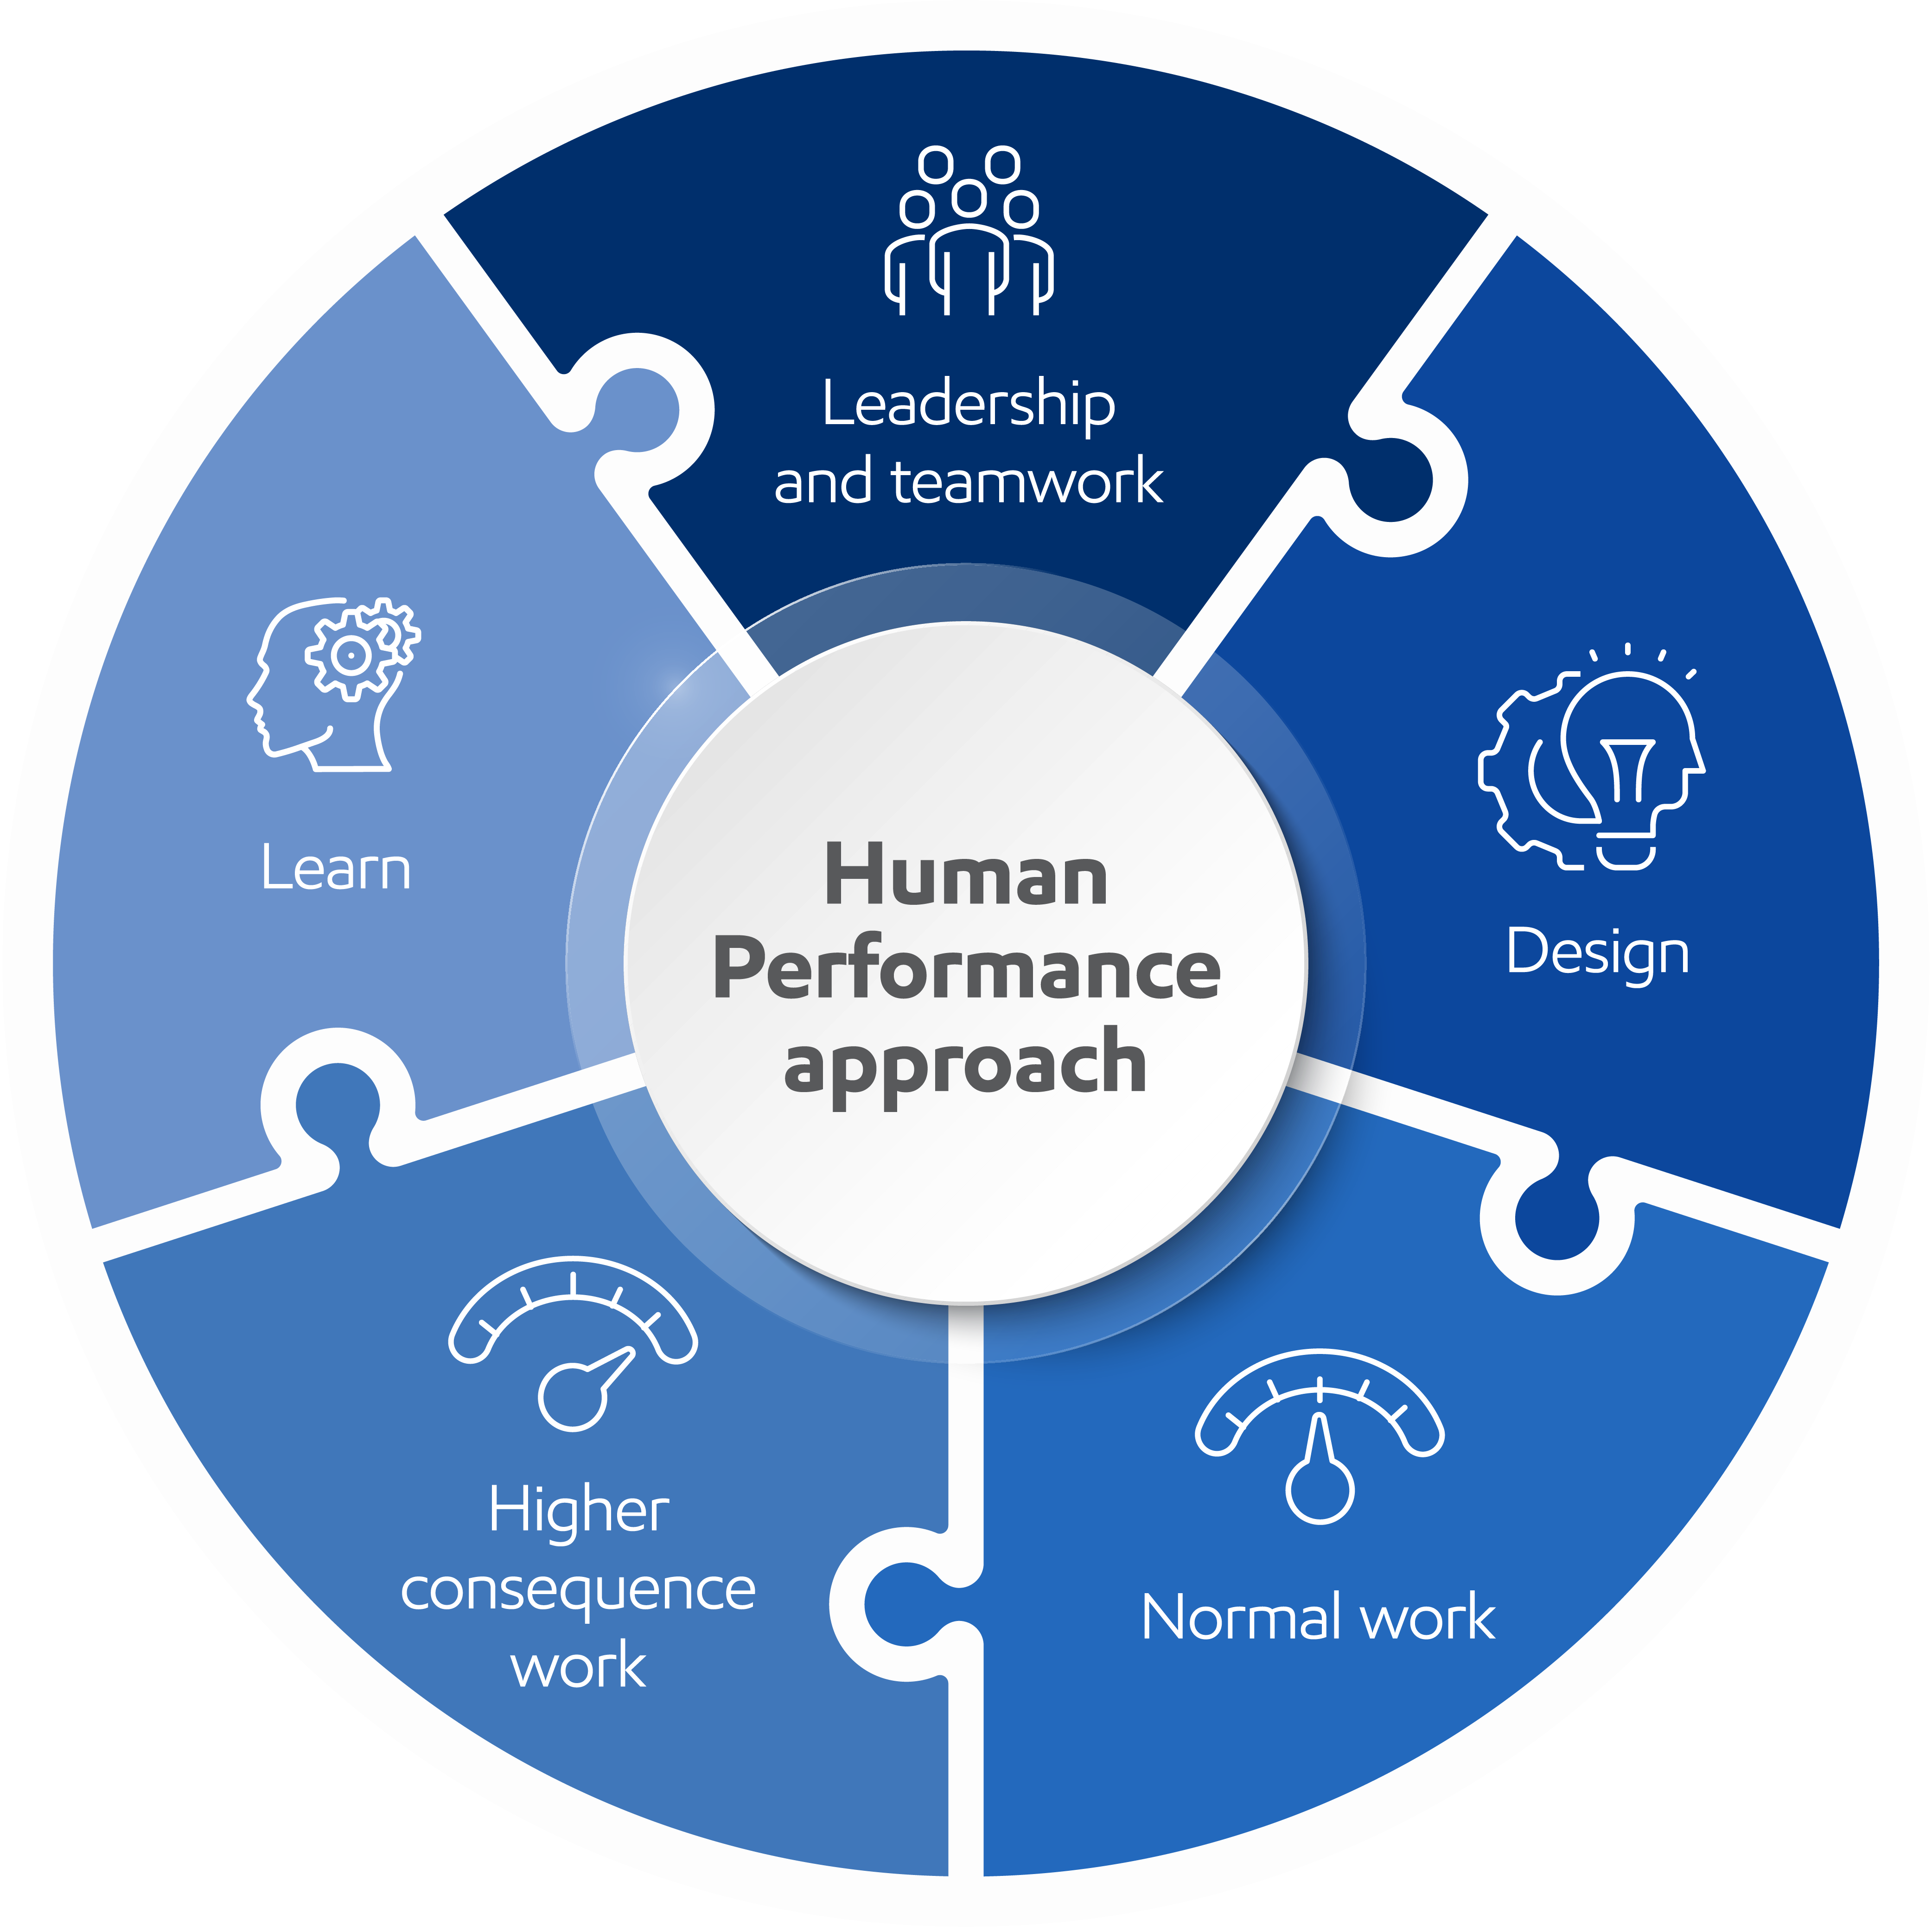 Image Figure 1: Integrating the Human Performance (HP) Model
Note: ExxonMobil’s HP Approach uses a five-part model intended to move the organization to a mature state where HP concepts and principles are integrated into OIMS and the normal way of doing business